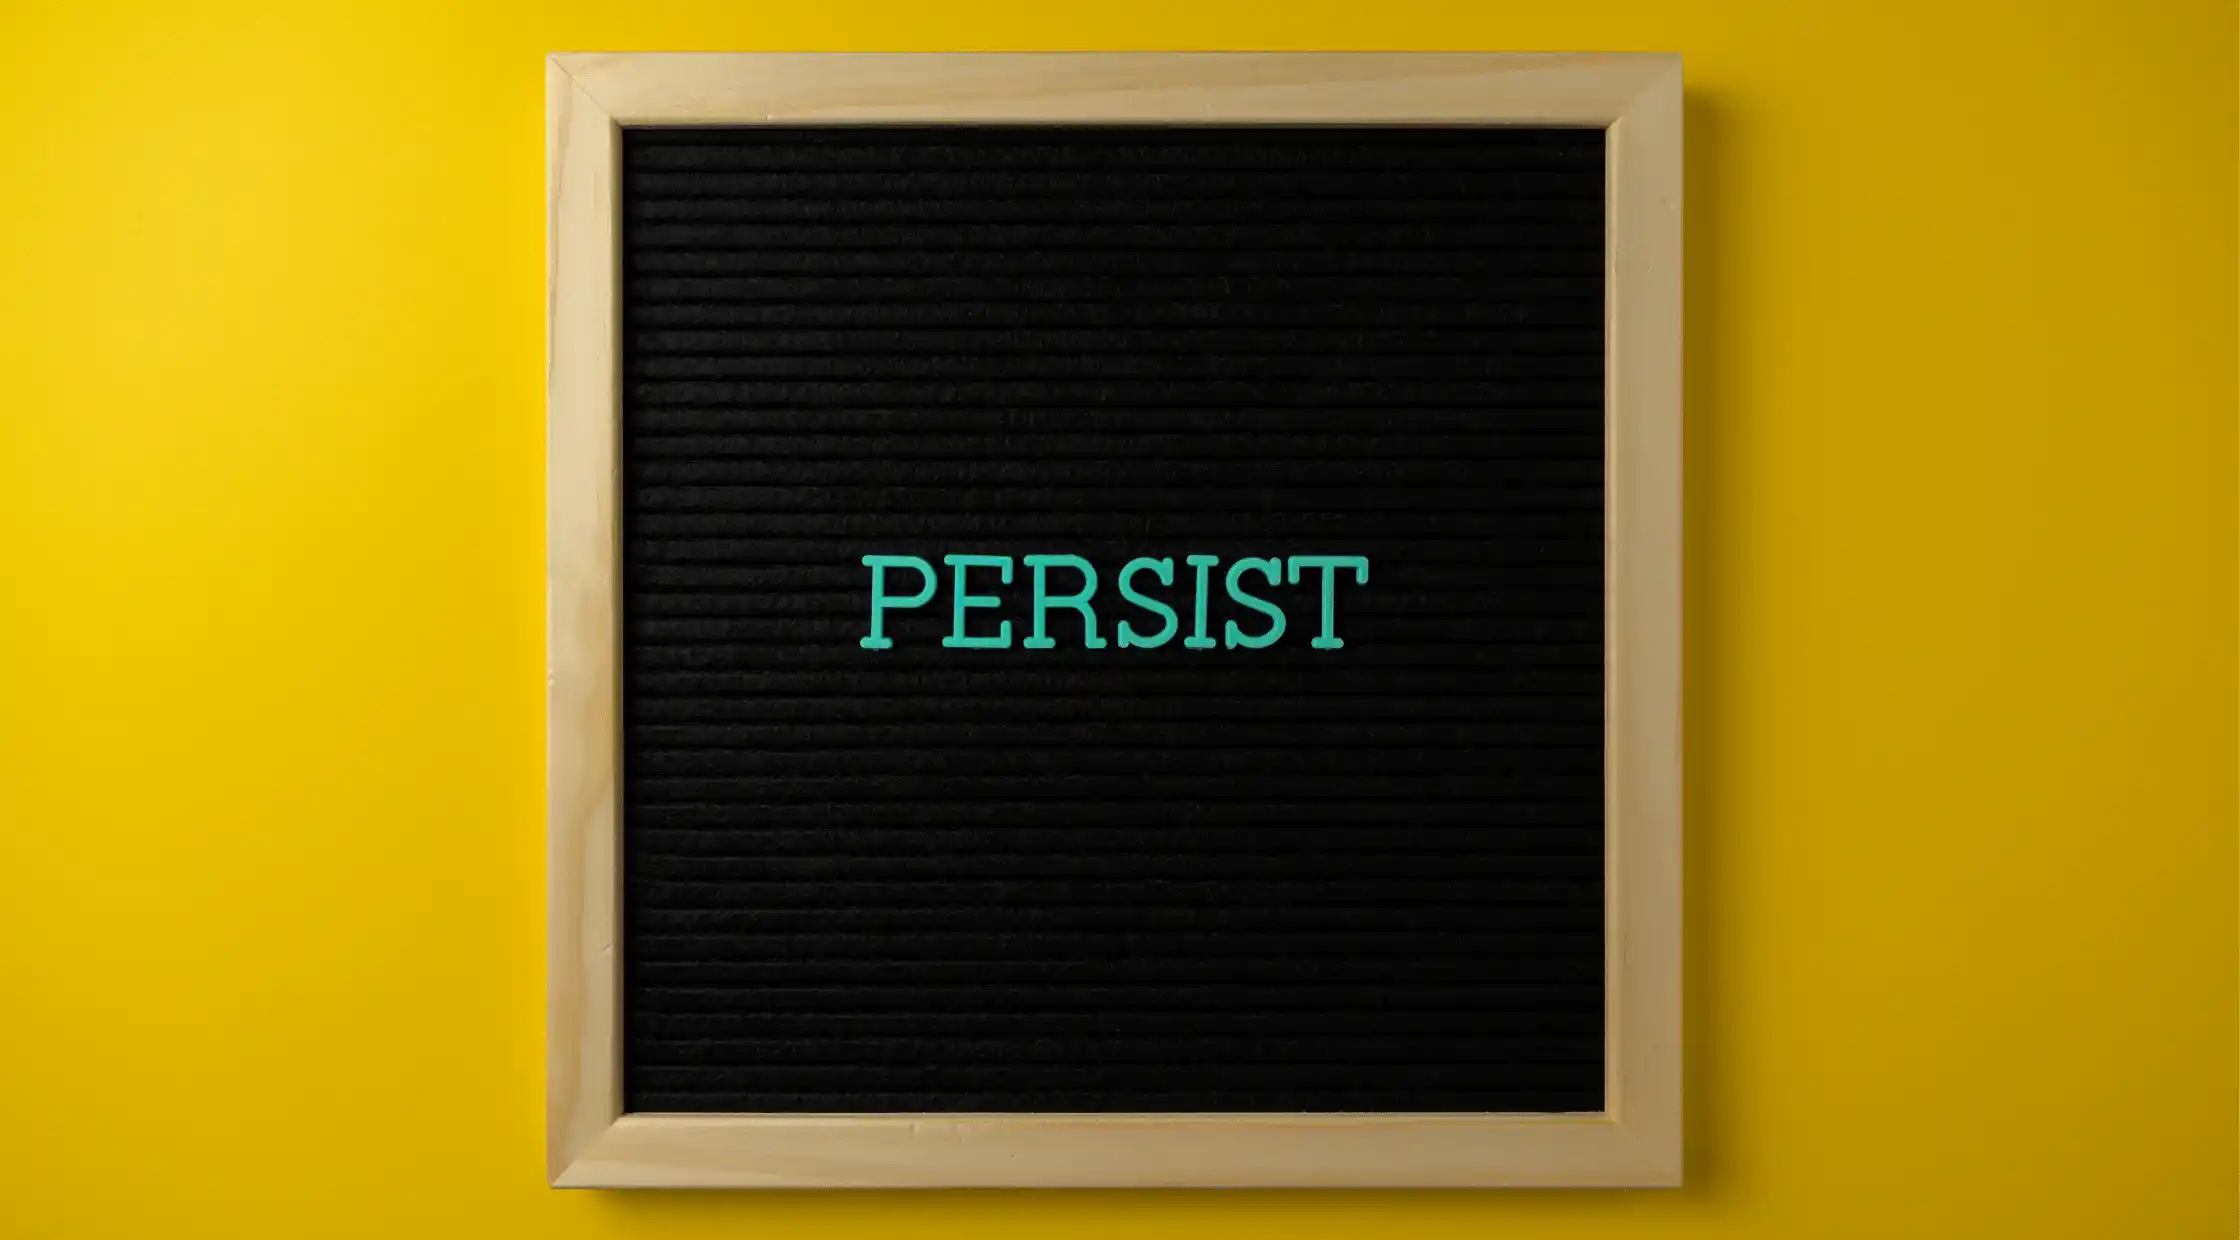 Persistence Meaning